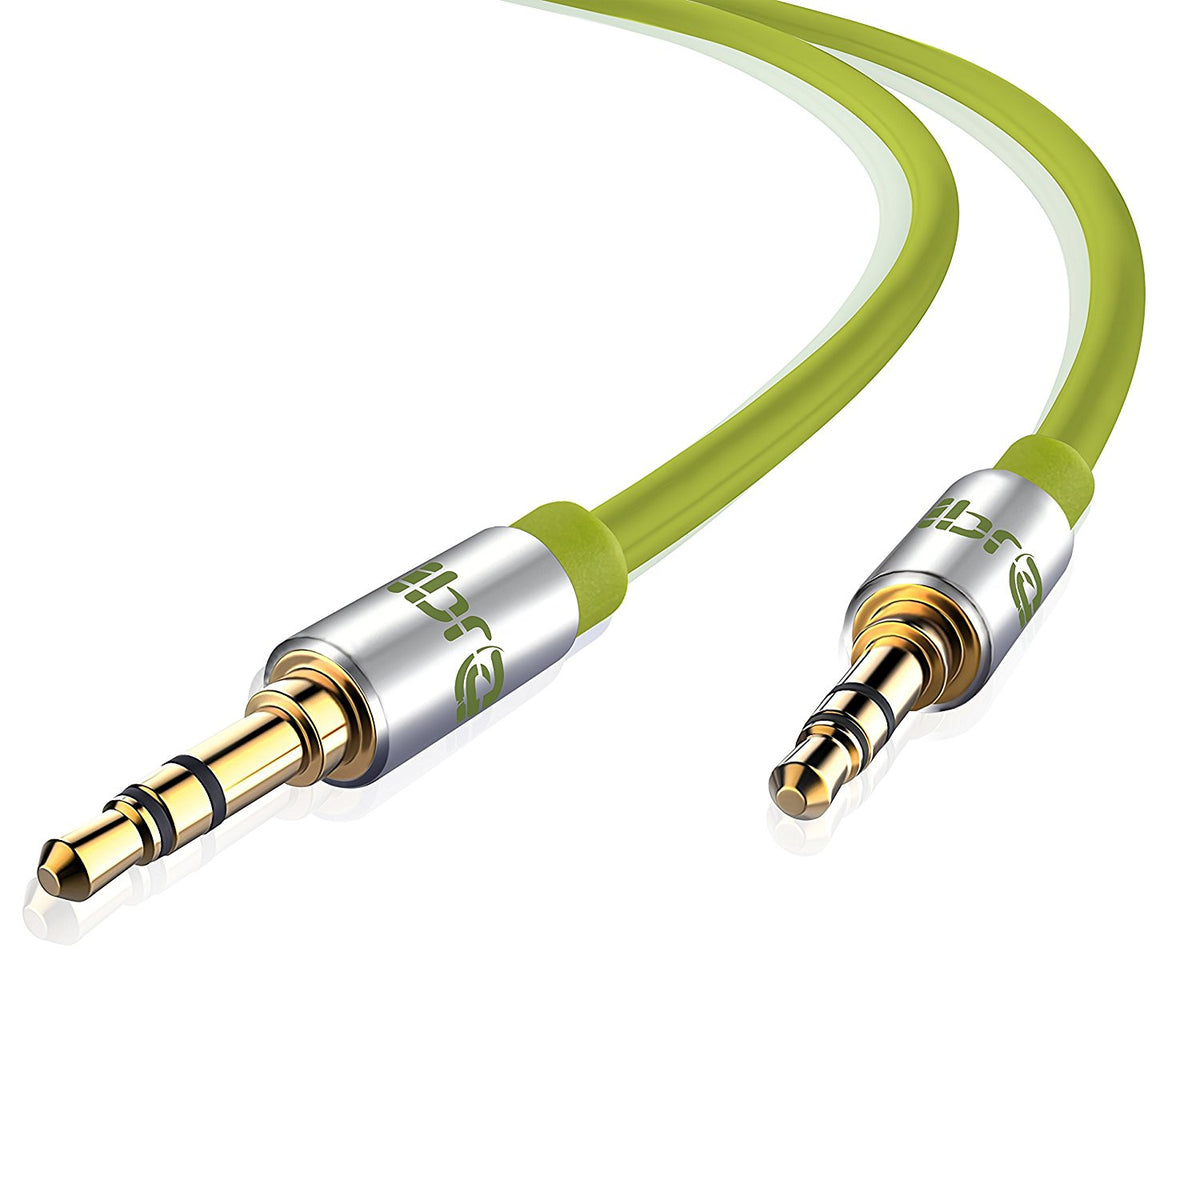 Aux Cable 2M 3.5mm Stereo Pro Auxiliary Audio Cable - for Beats Headphones Apple iPod iPhone iPad Samsung LG Smartphone MP3 Player Home / Car etc - IBRA Green